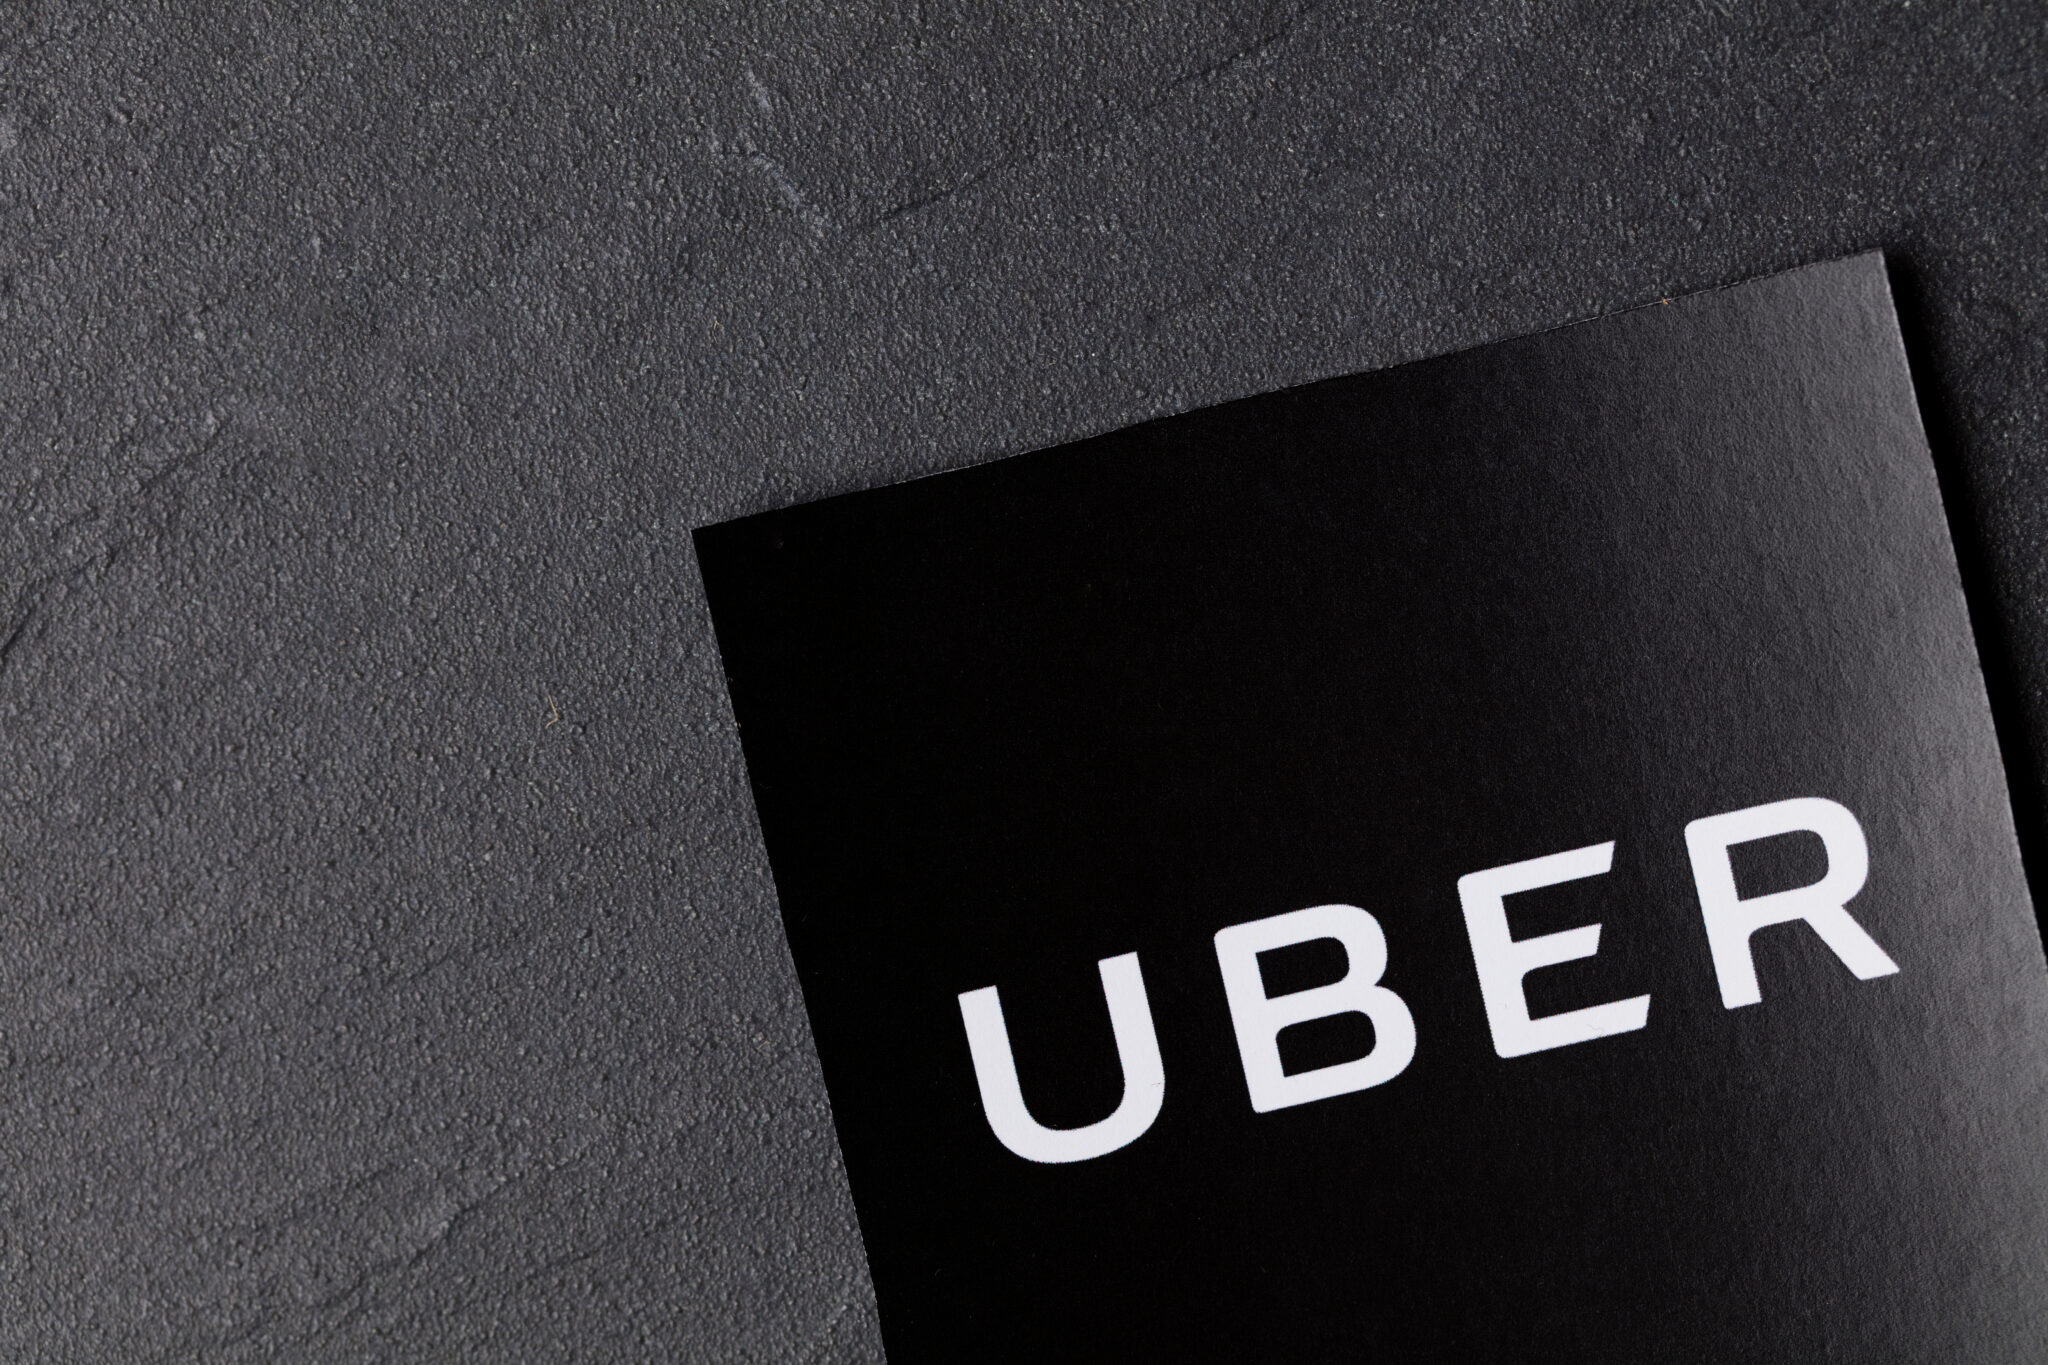 A photograph of the Uber logo. Uber is a popular taxi style transport service application, founded in 2009